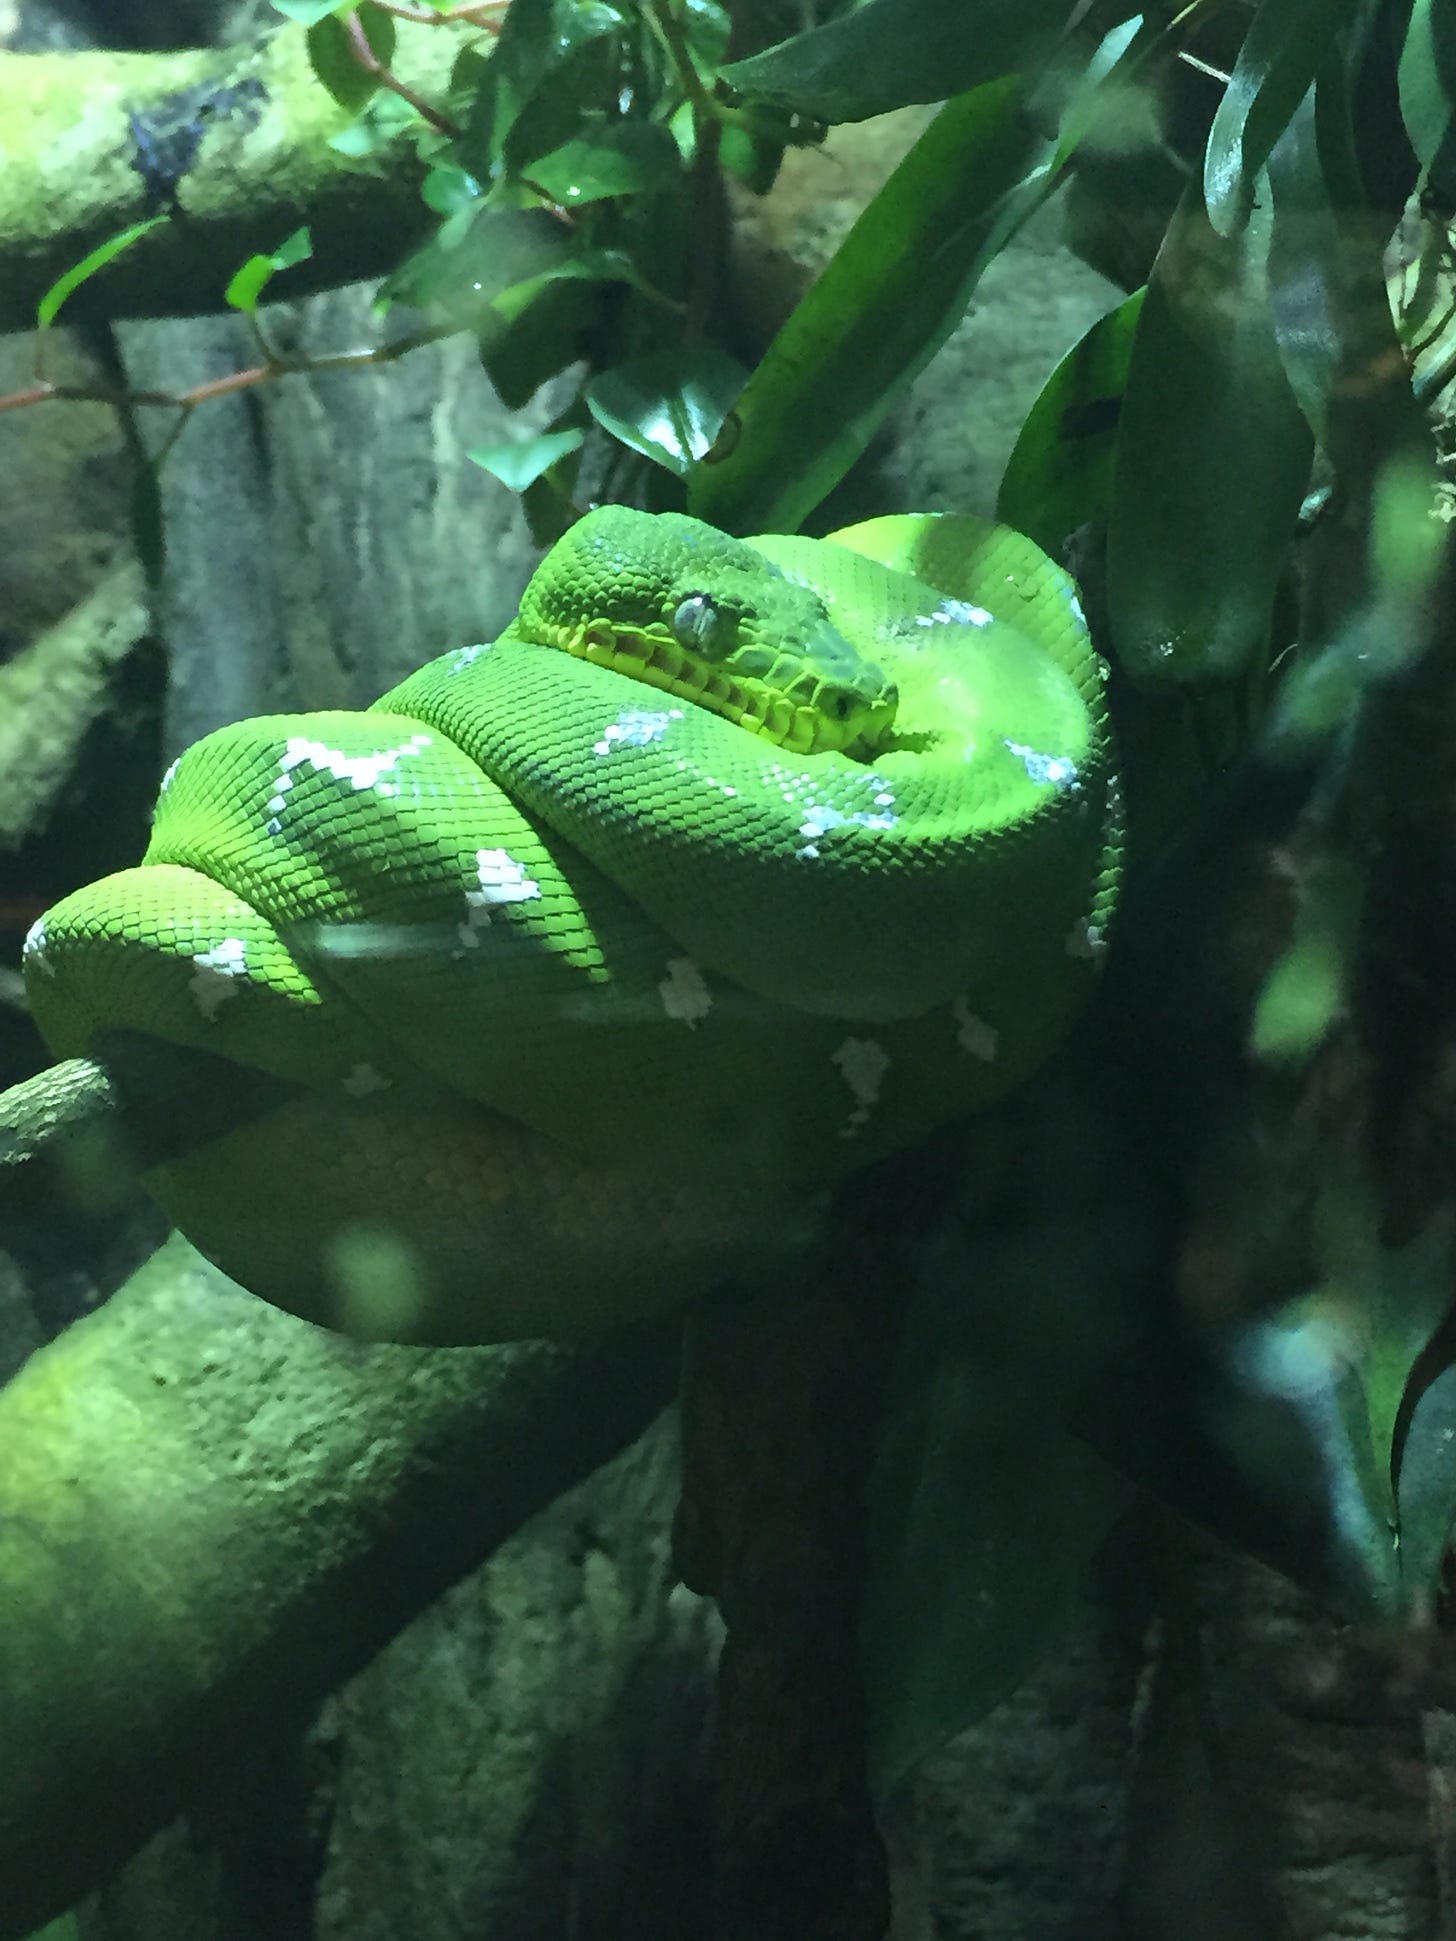 Photo of a snake I took in Vancouver Aquarium, Canada in 2015